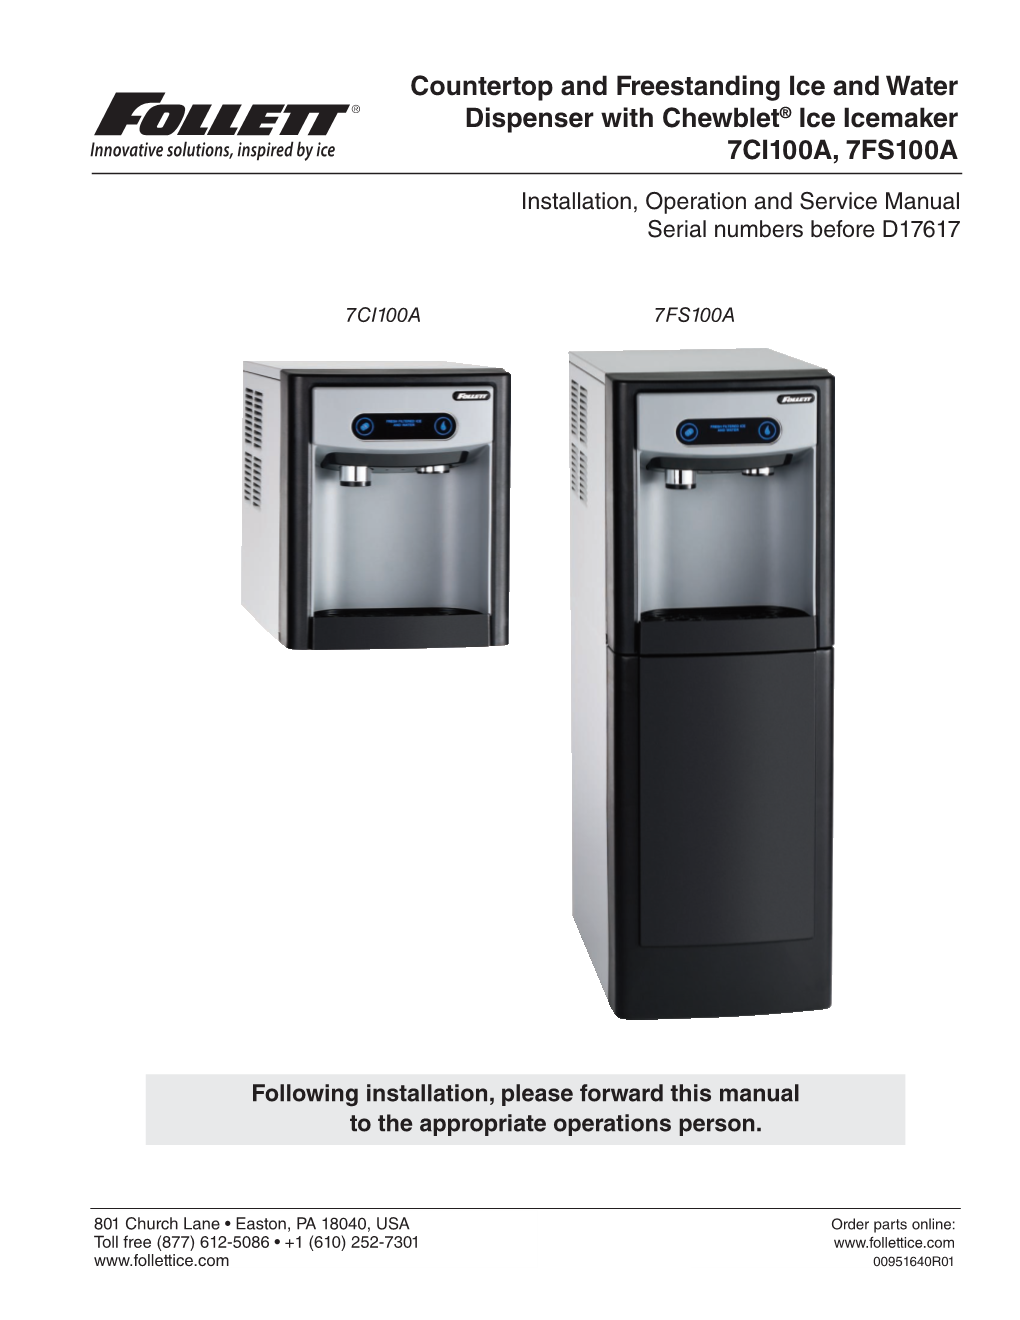 Countertop and Freestanding Ice and Water Dispenser with Chewblet® Ice Icemaker 7CI100A, 7FS100A